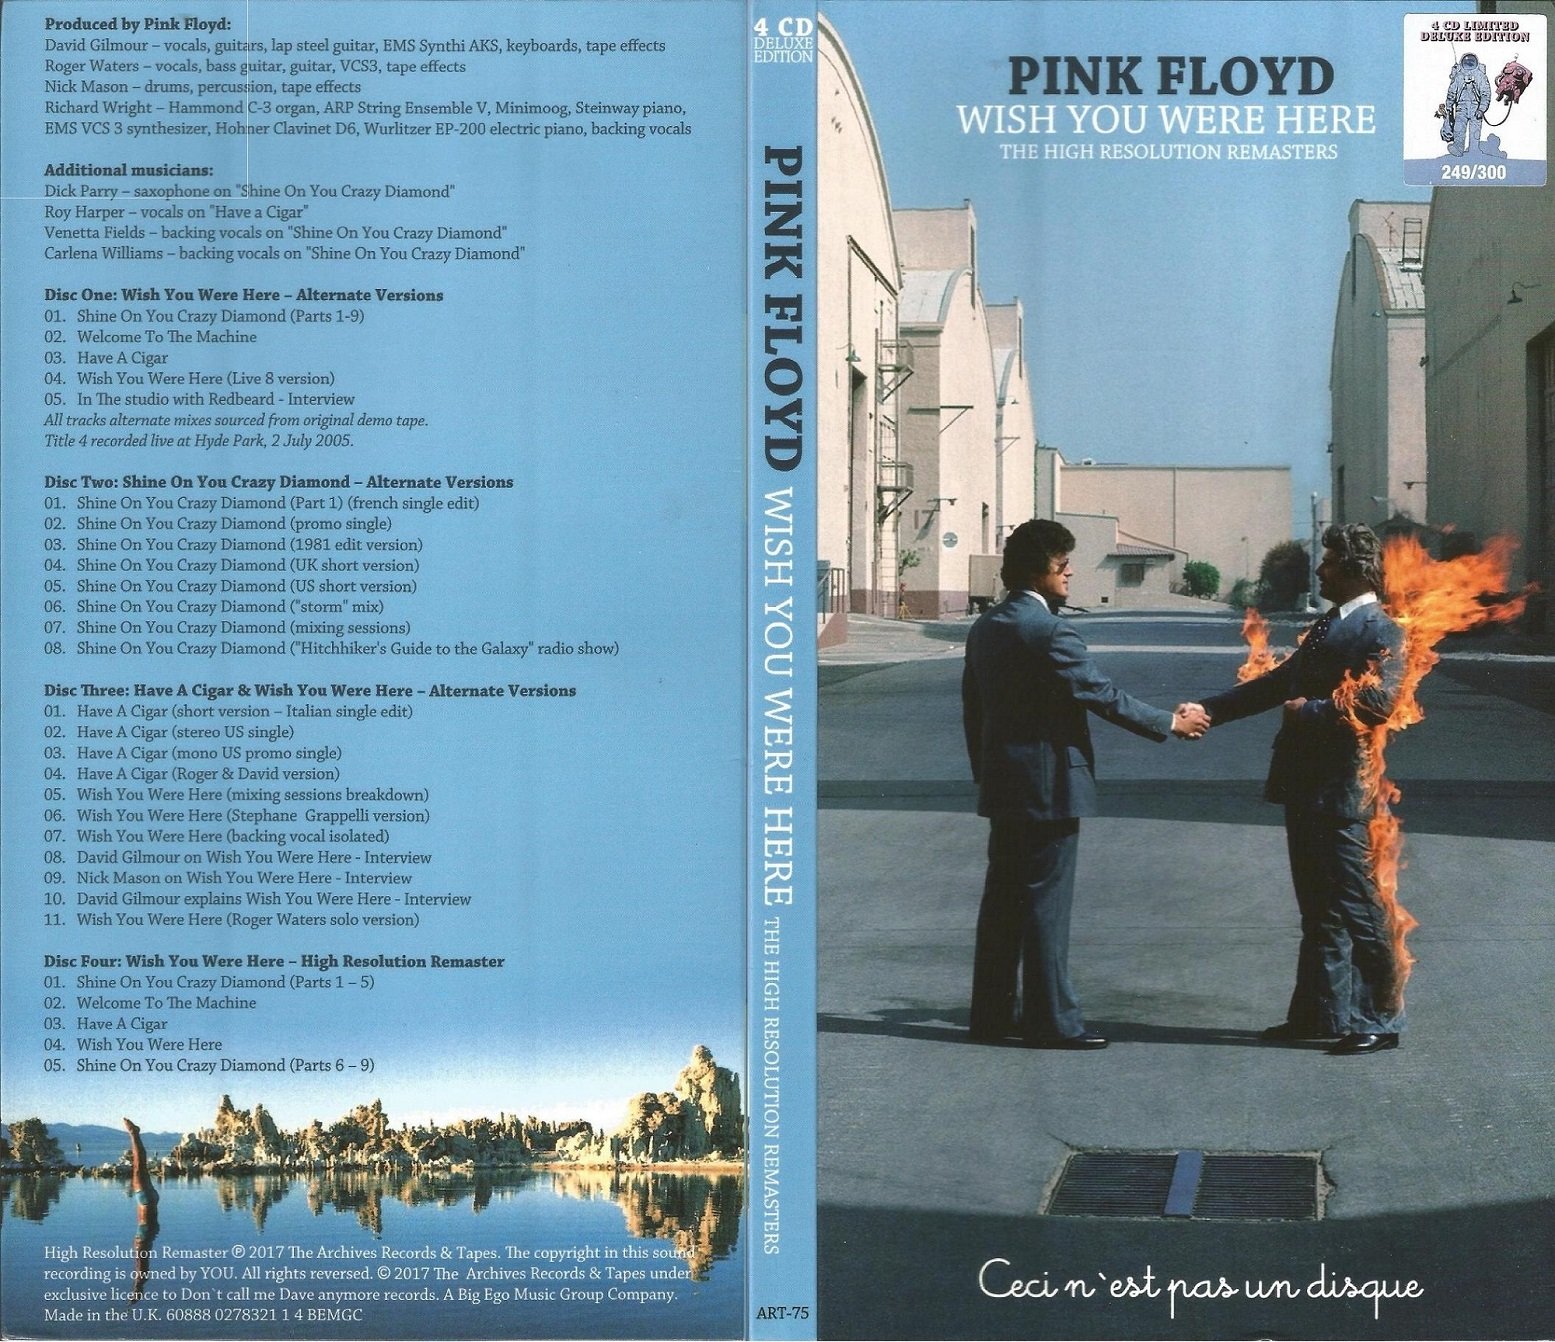 pink floyd wish you were here album free mp3 download